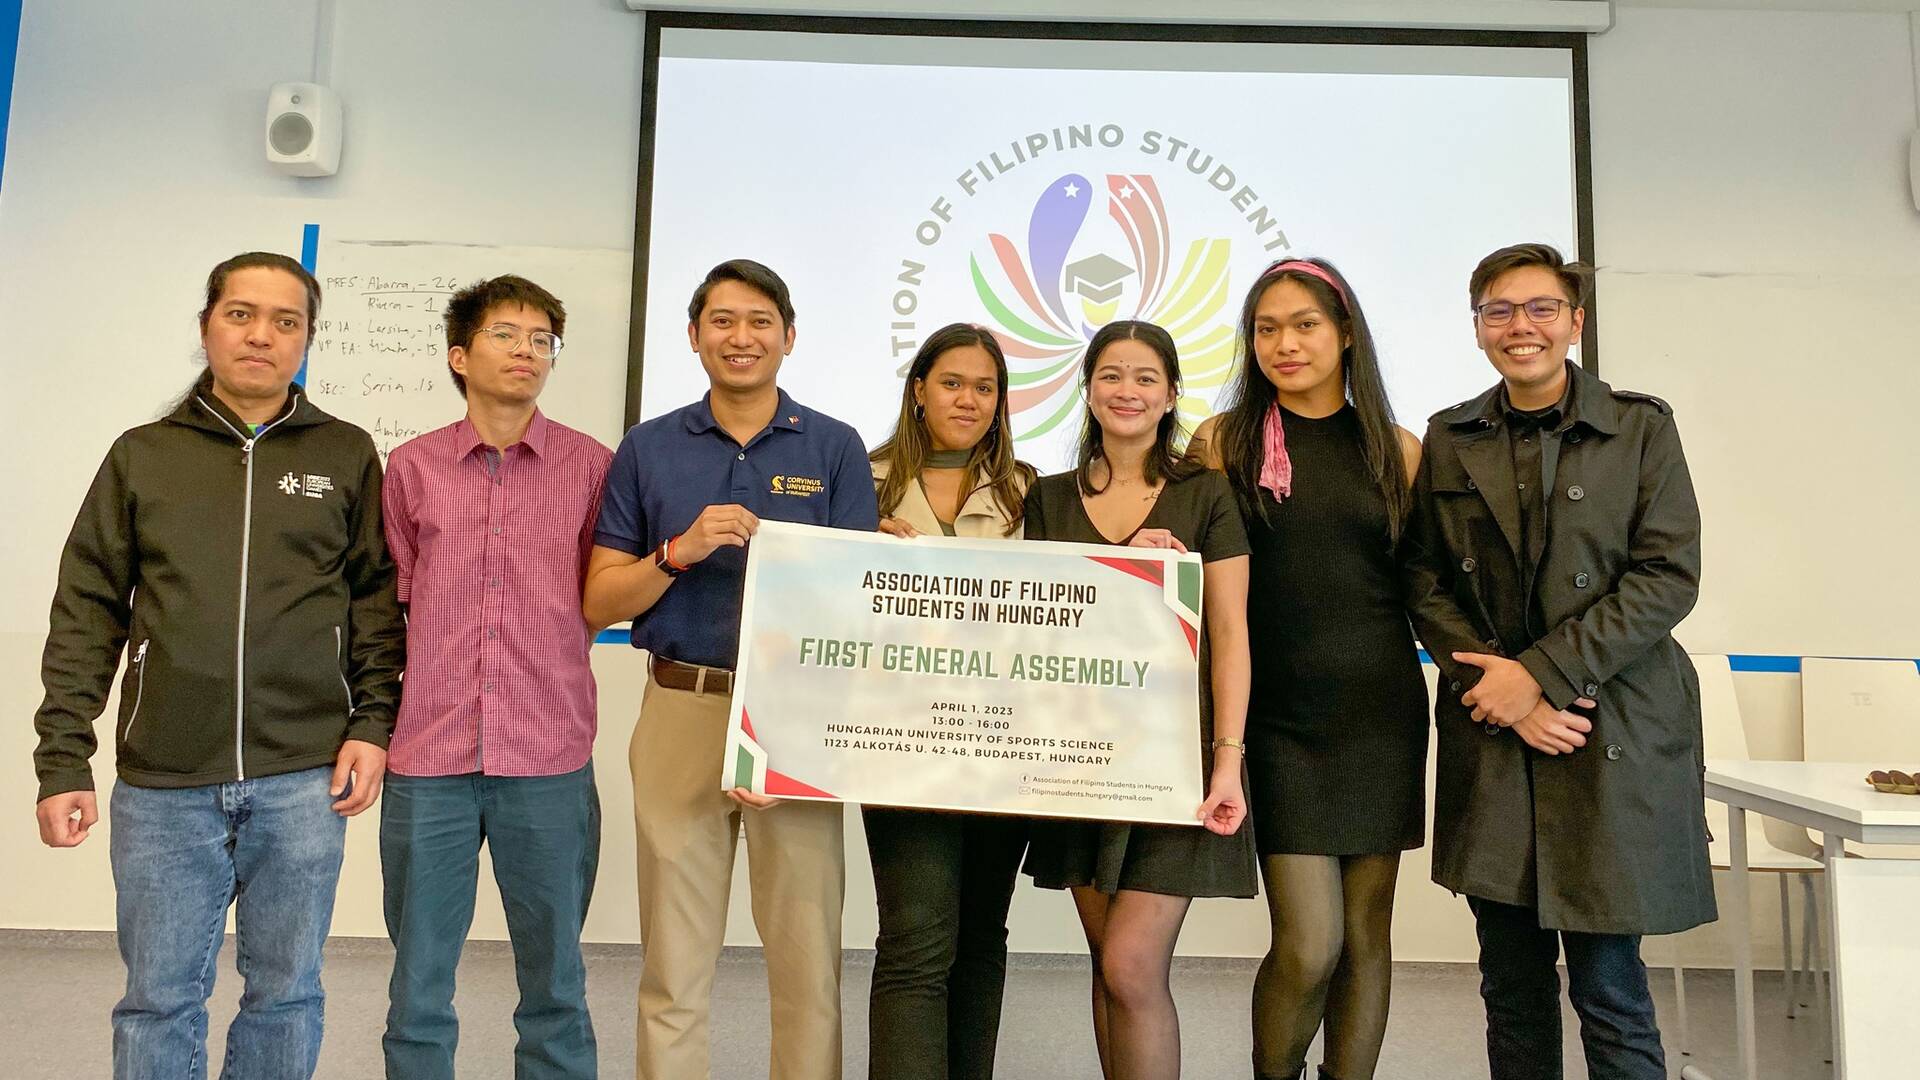 HUSS hosts the first General Assembly of the Association of Filipino Students in Hungary